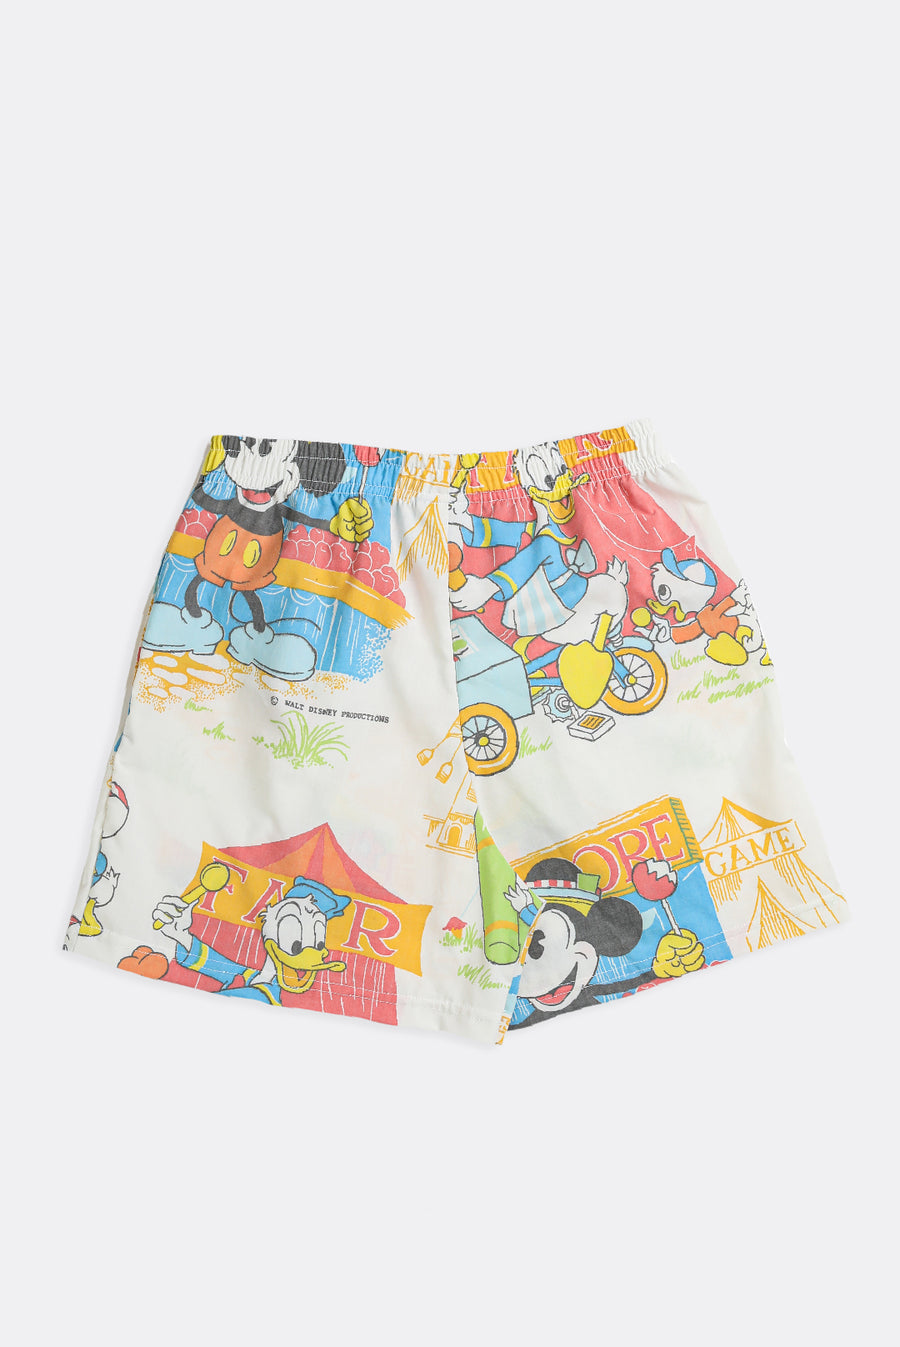 Unisex Rework Mickey and Friends Boxer Shorts - S, M, L